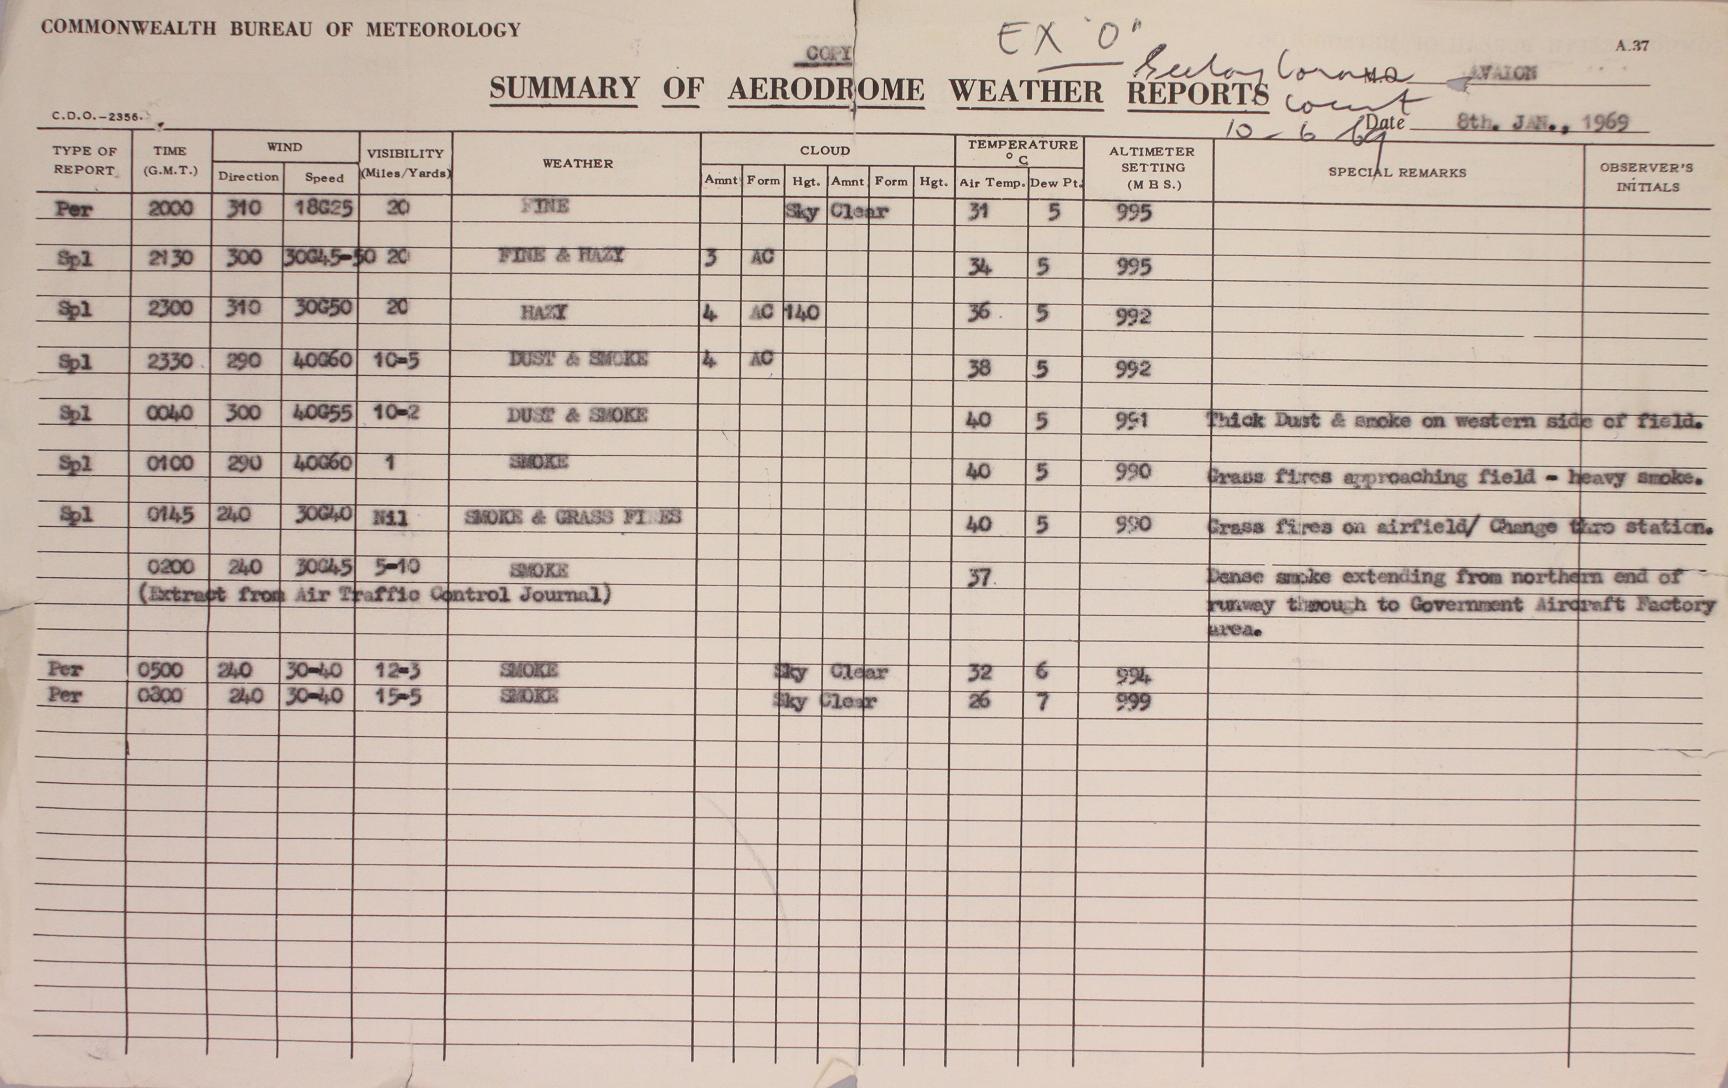 The weather and conditions the day of the Lara Fires (8 Jan 1969)